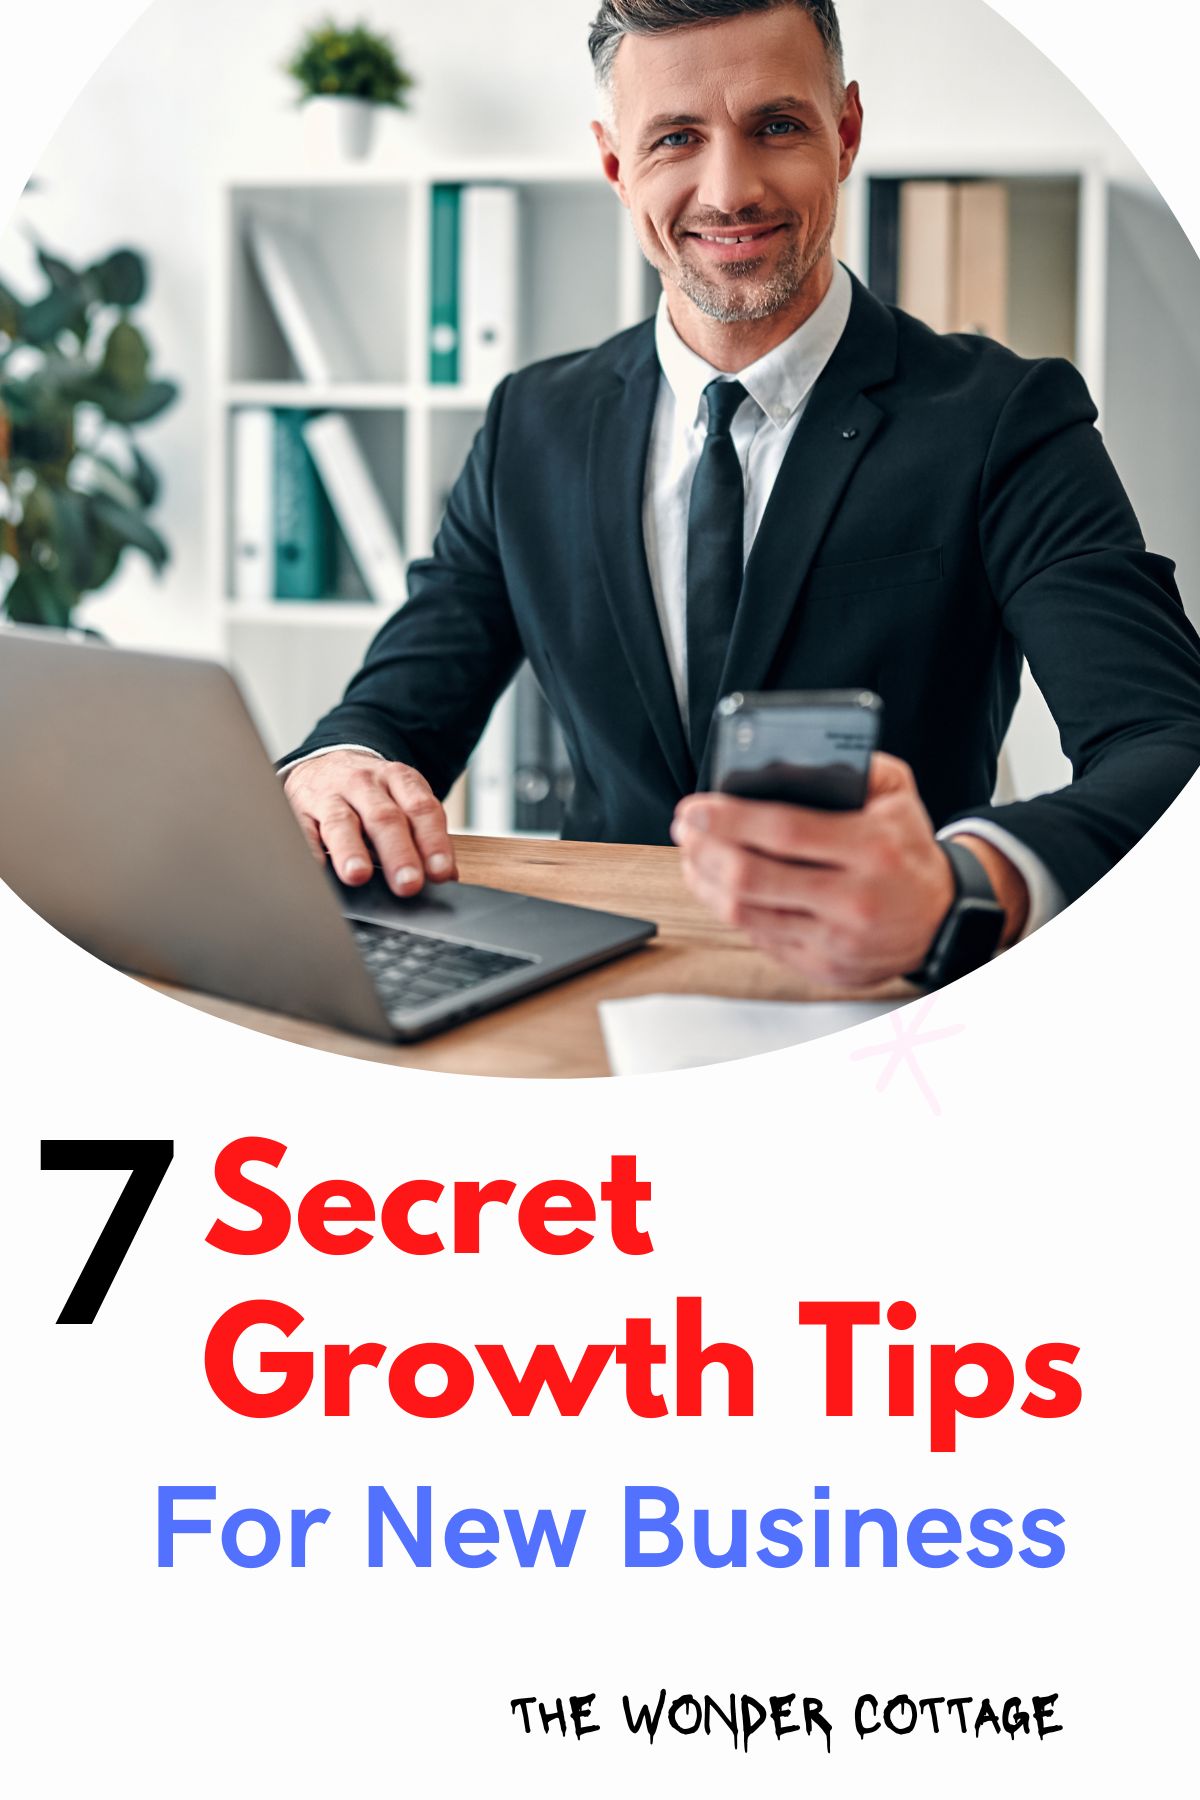 7 Secret Growth Tips For New Businesses